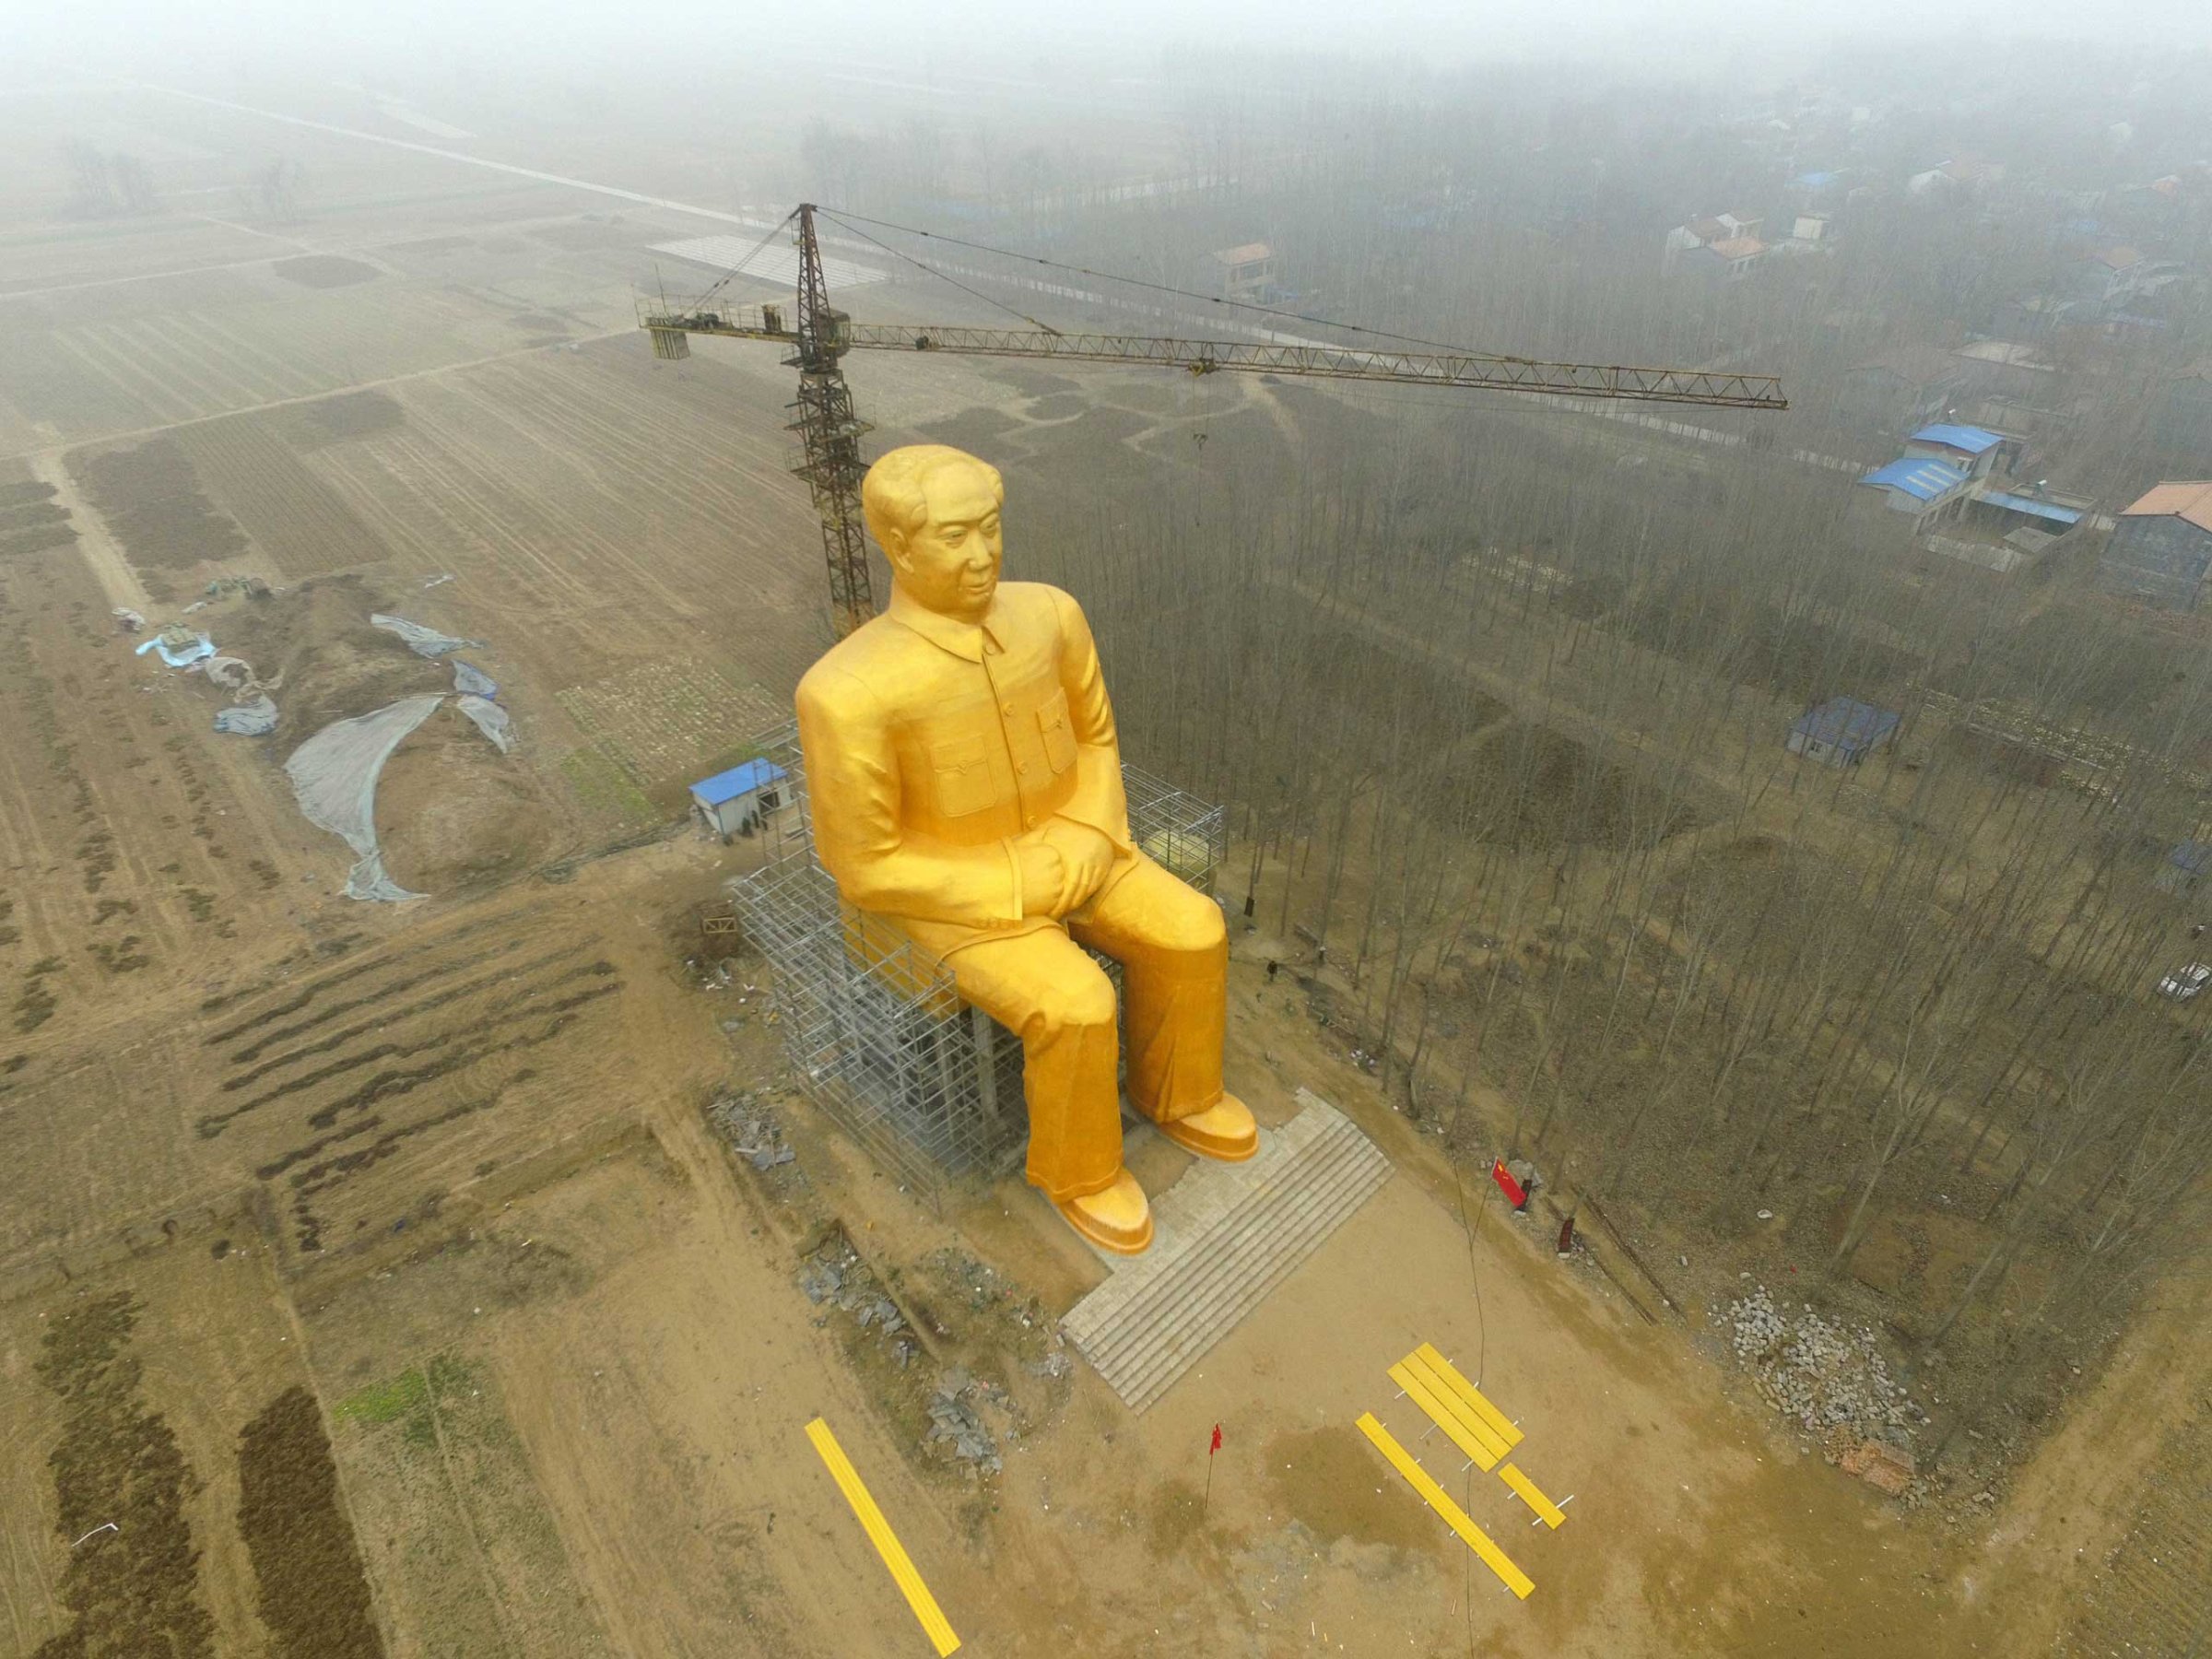 A huge statue of Chairman Mao Zedong, 36.6 meters in height, is seen under construction at Zhushigang village in Tongxu County, China, on Jan. 4.